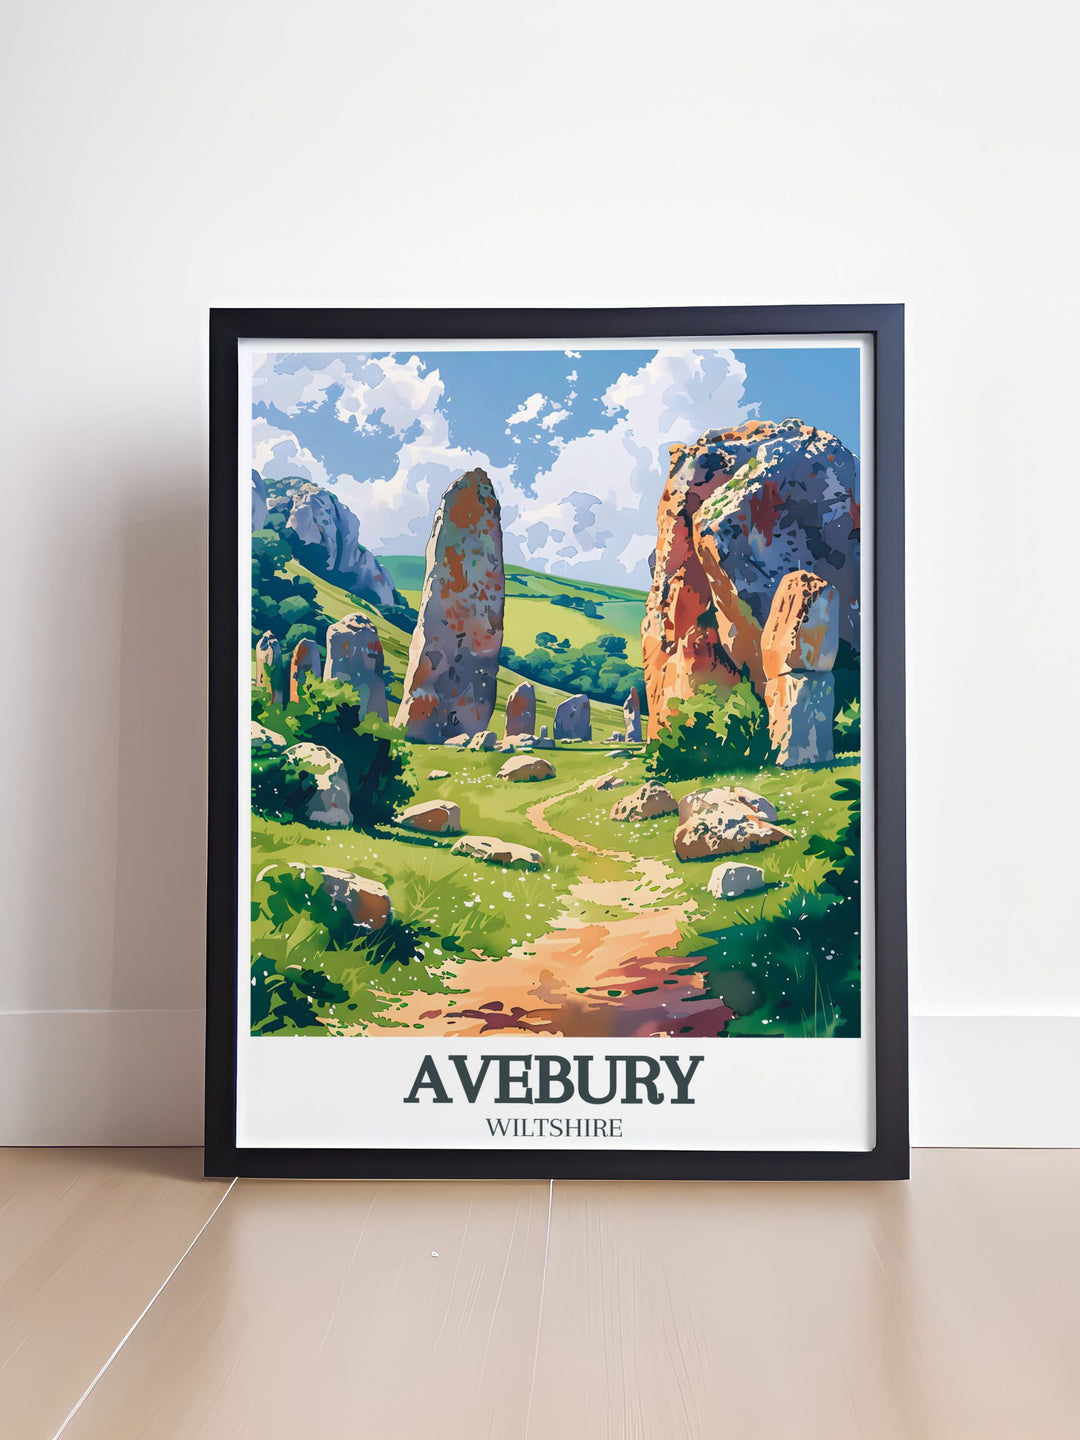 The ancient grandeur of Avebury Stone Circle is captured in this art print, showcasing the impressive megaliths set against the serene countryside of North Wessex. Perfect for adding a touch of historical elegance to your decor.